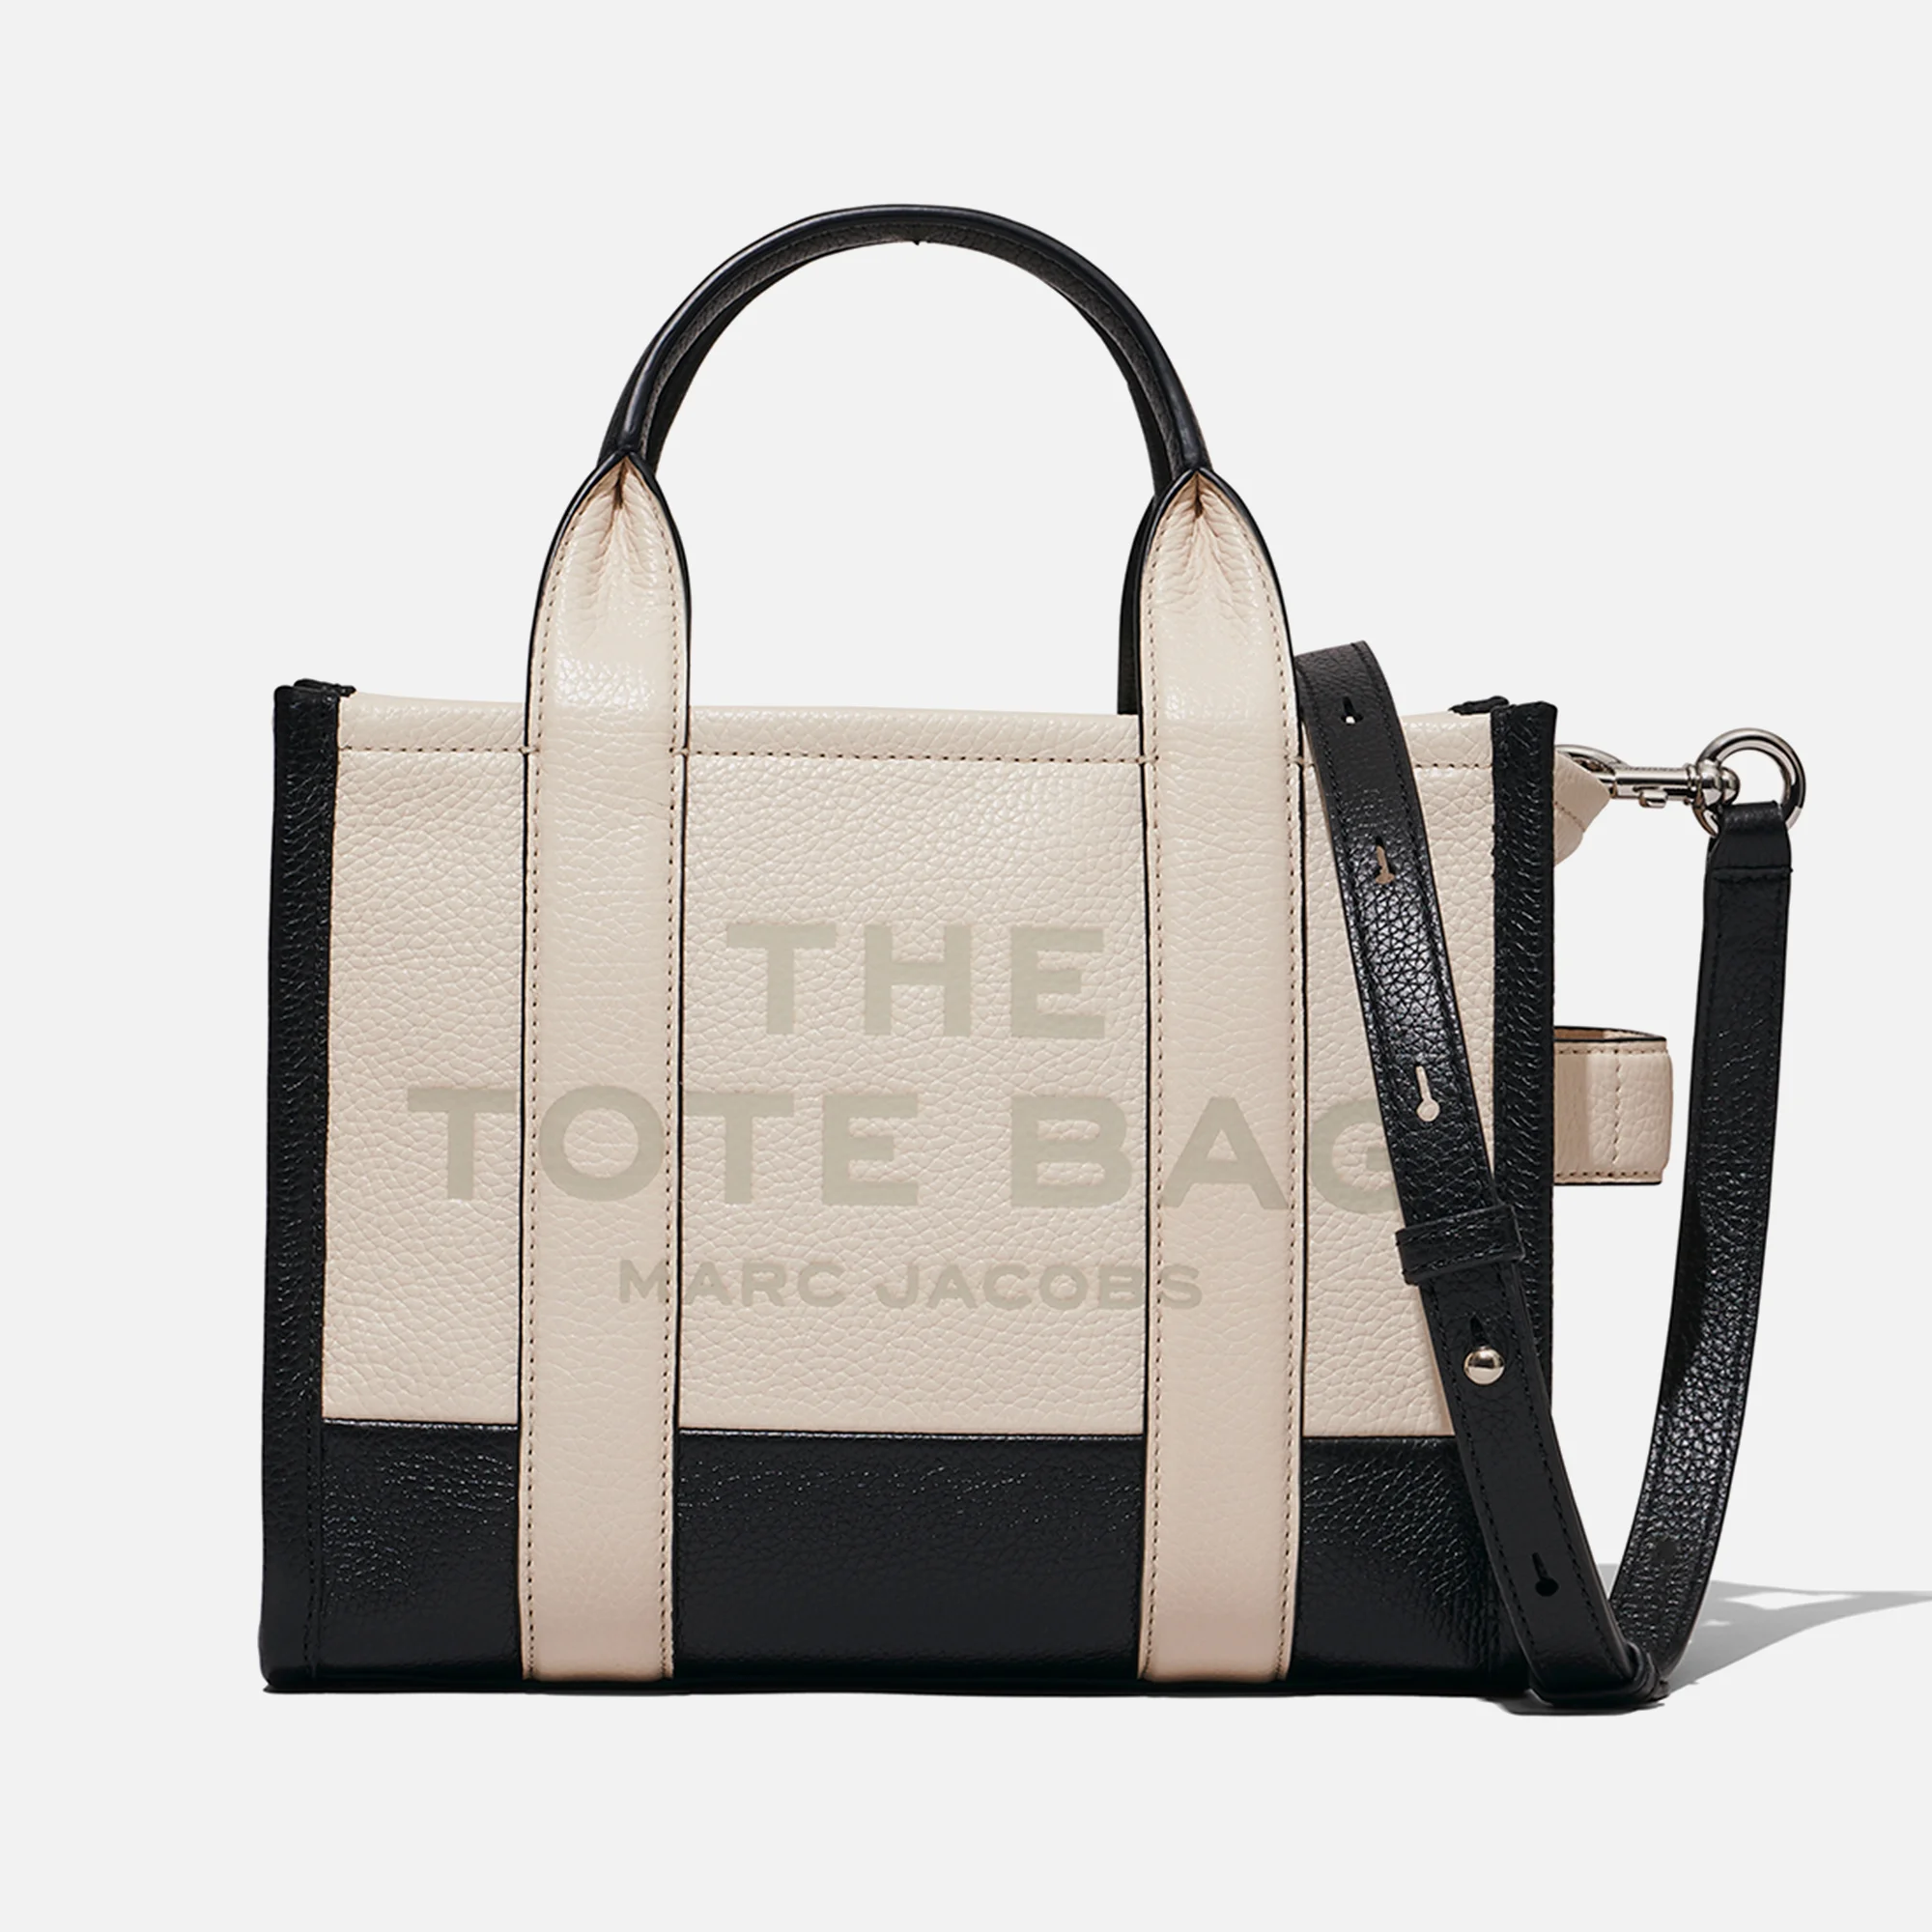 Marc Jacobs The Small Tote Colourblock Leather Tote Bag Image 1